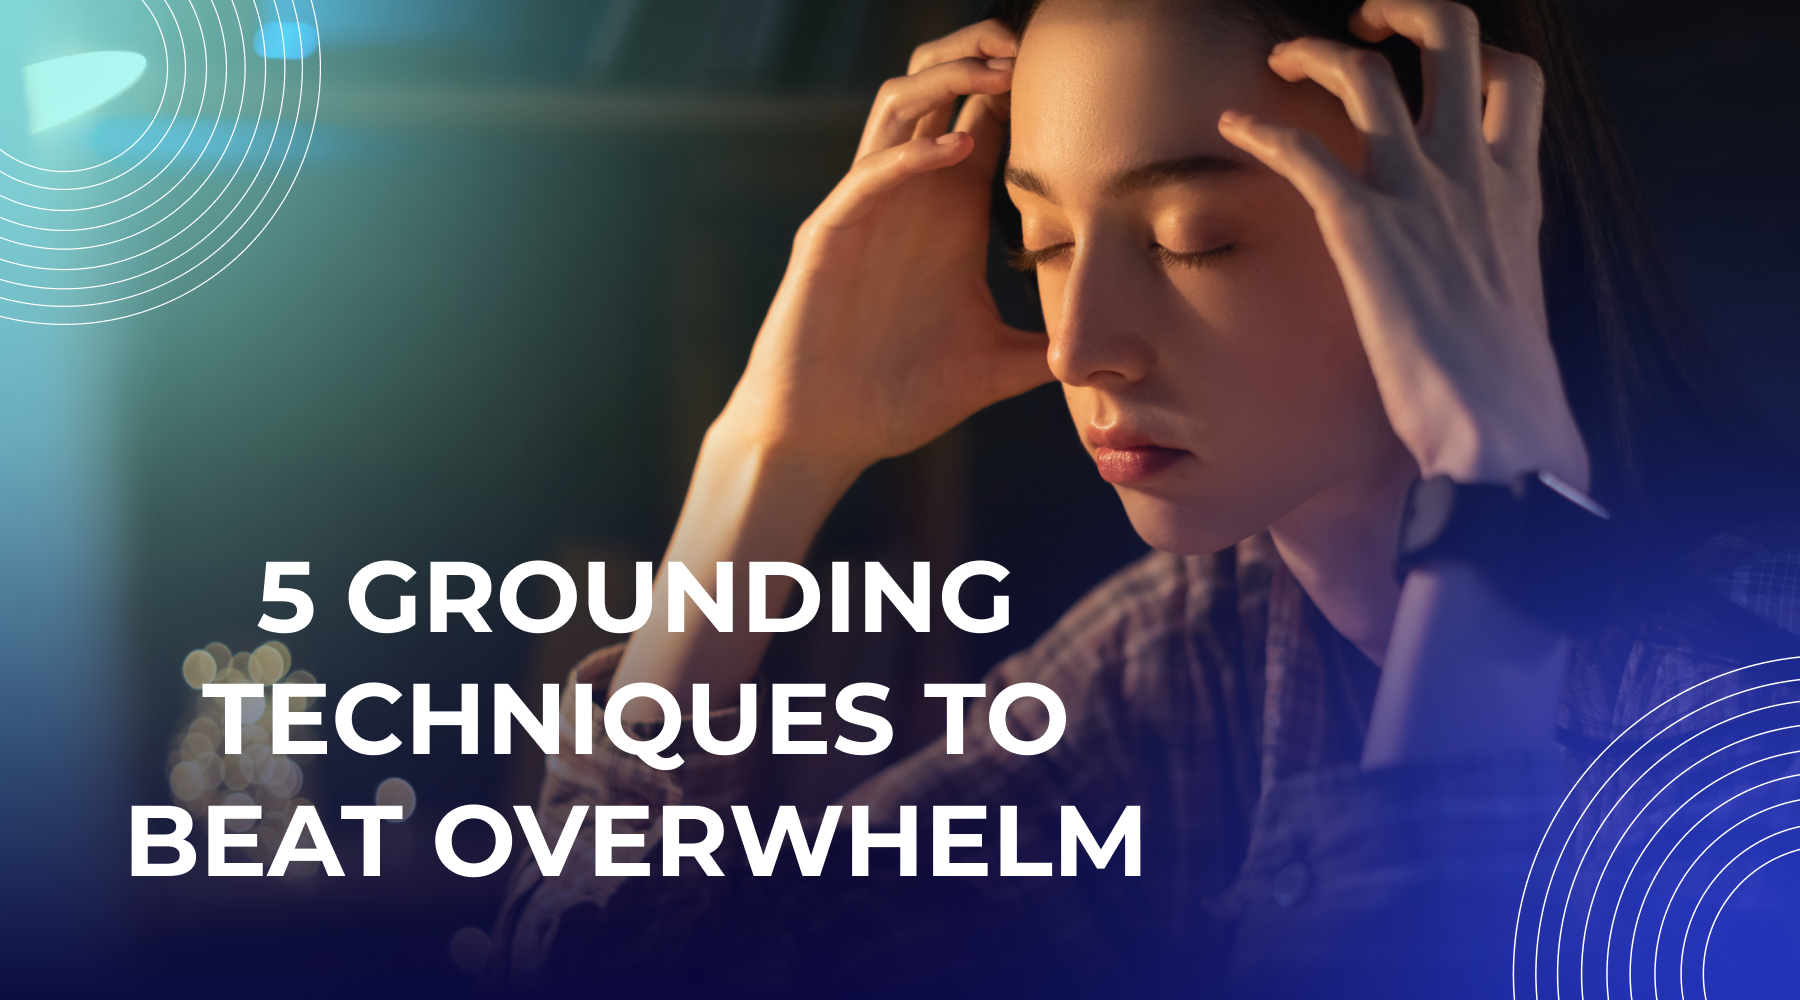 Feeling Overwhelmed? Here Are 5 Simple Ways To Get Grounded